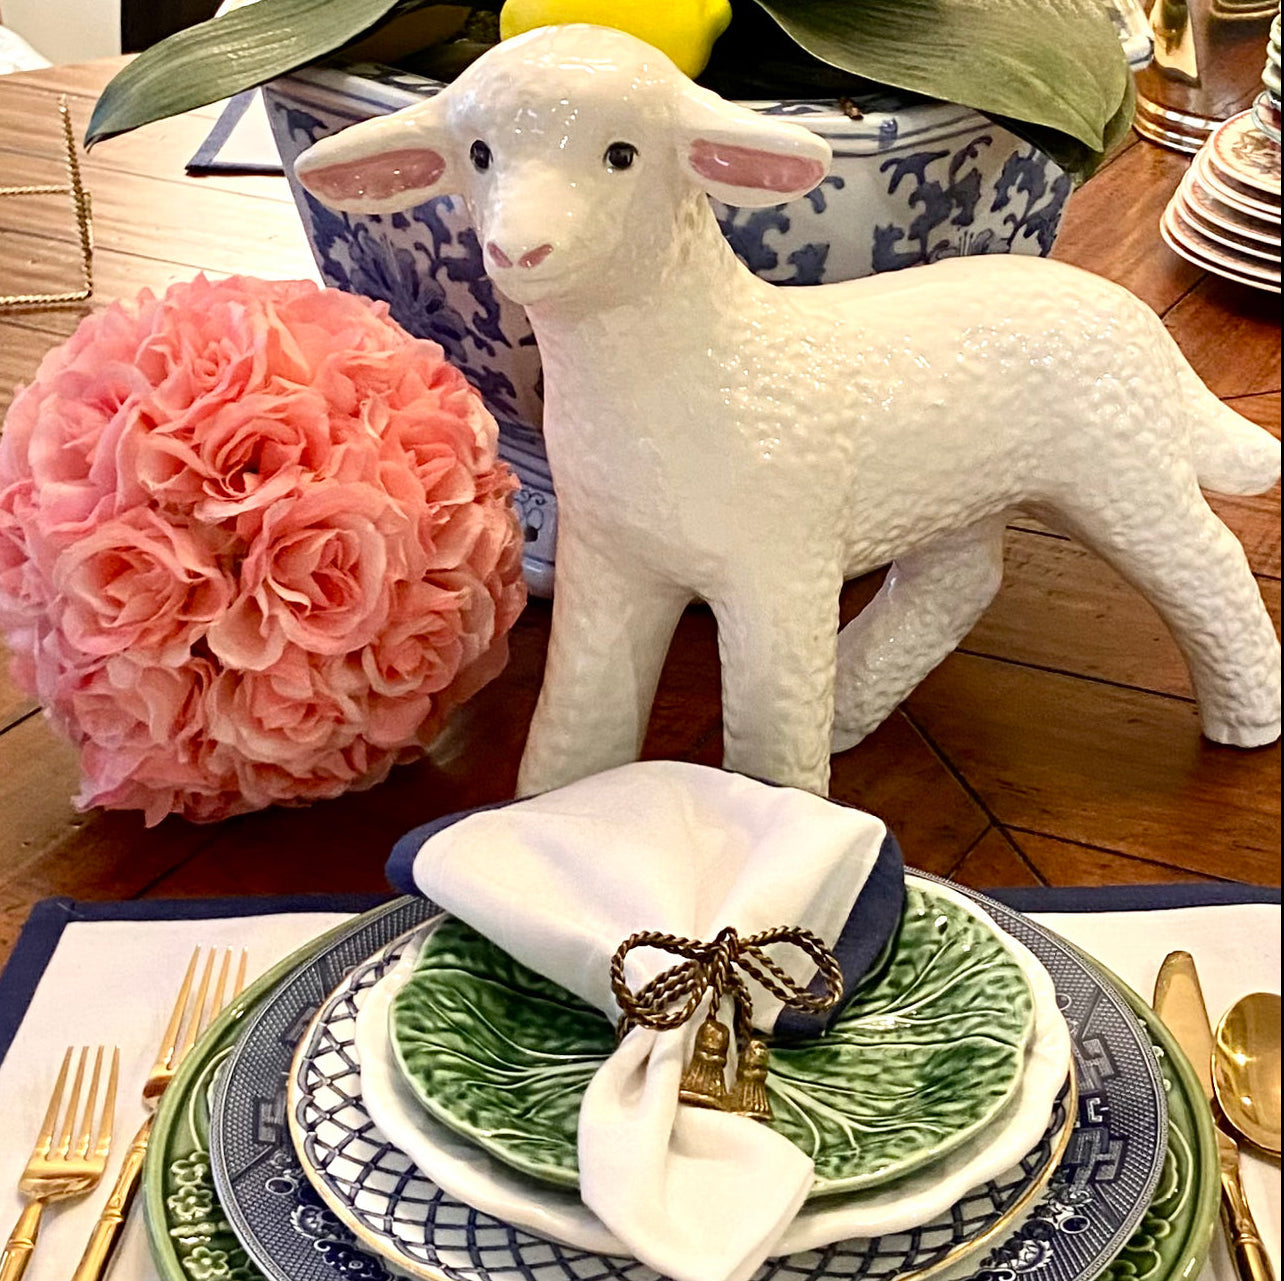 Vintage sweet & statuesque lamb centerpiece for your springtime holiday table scape.